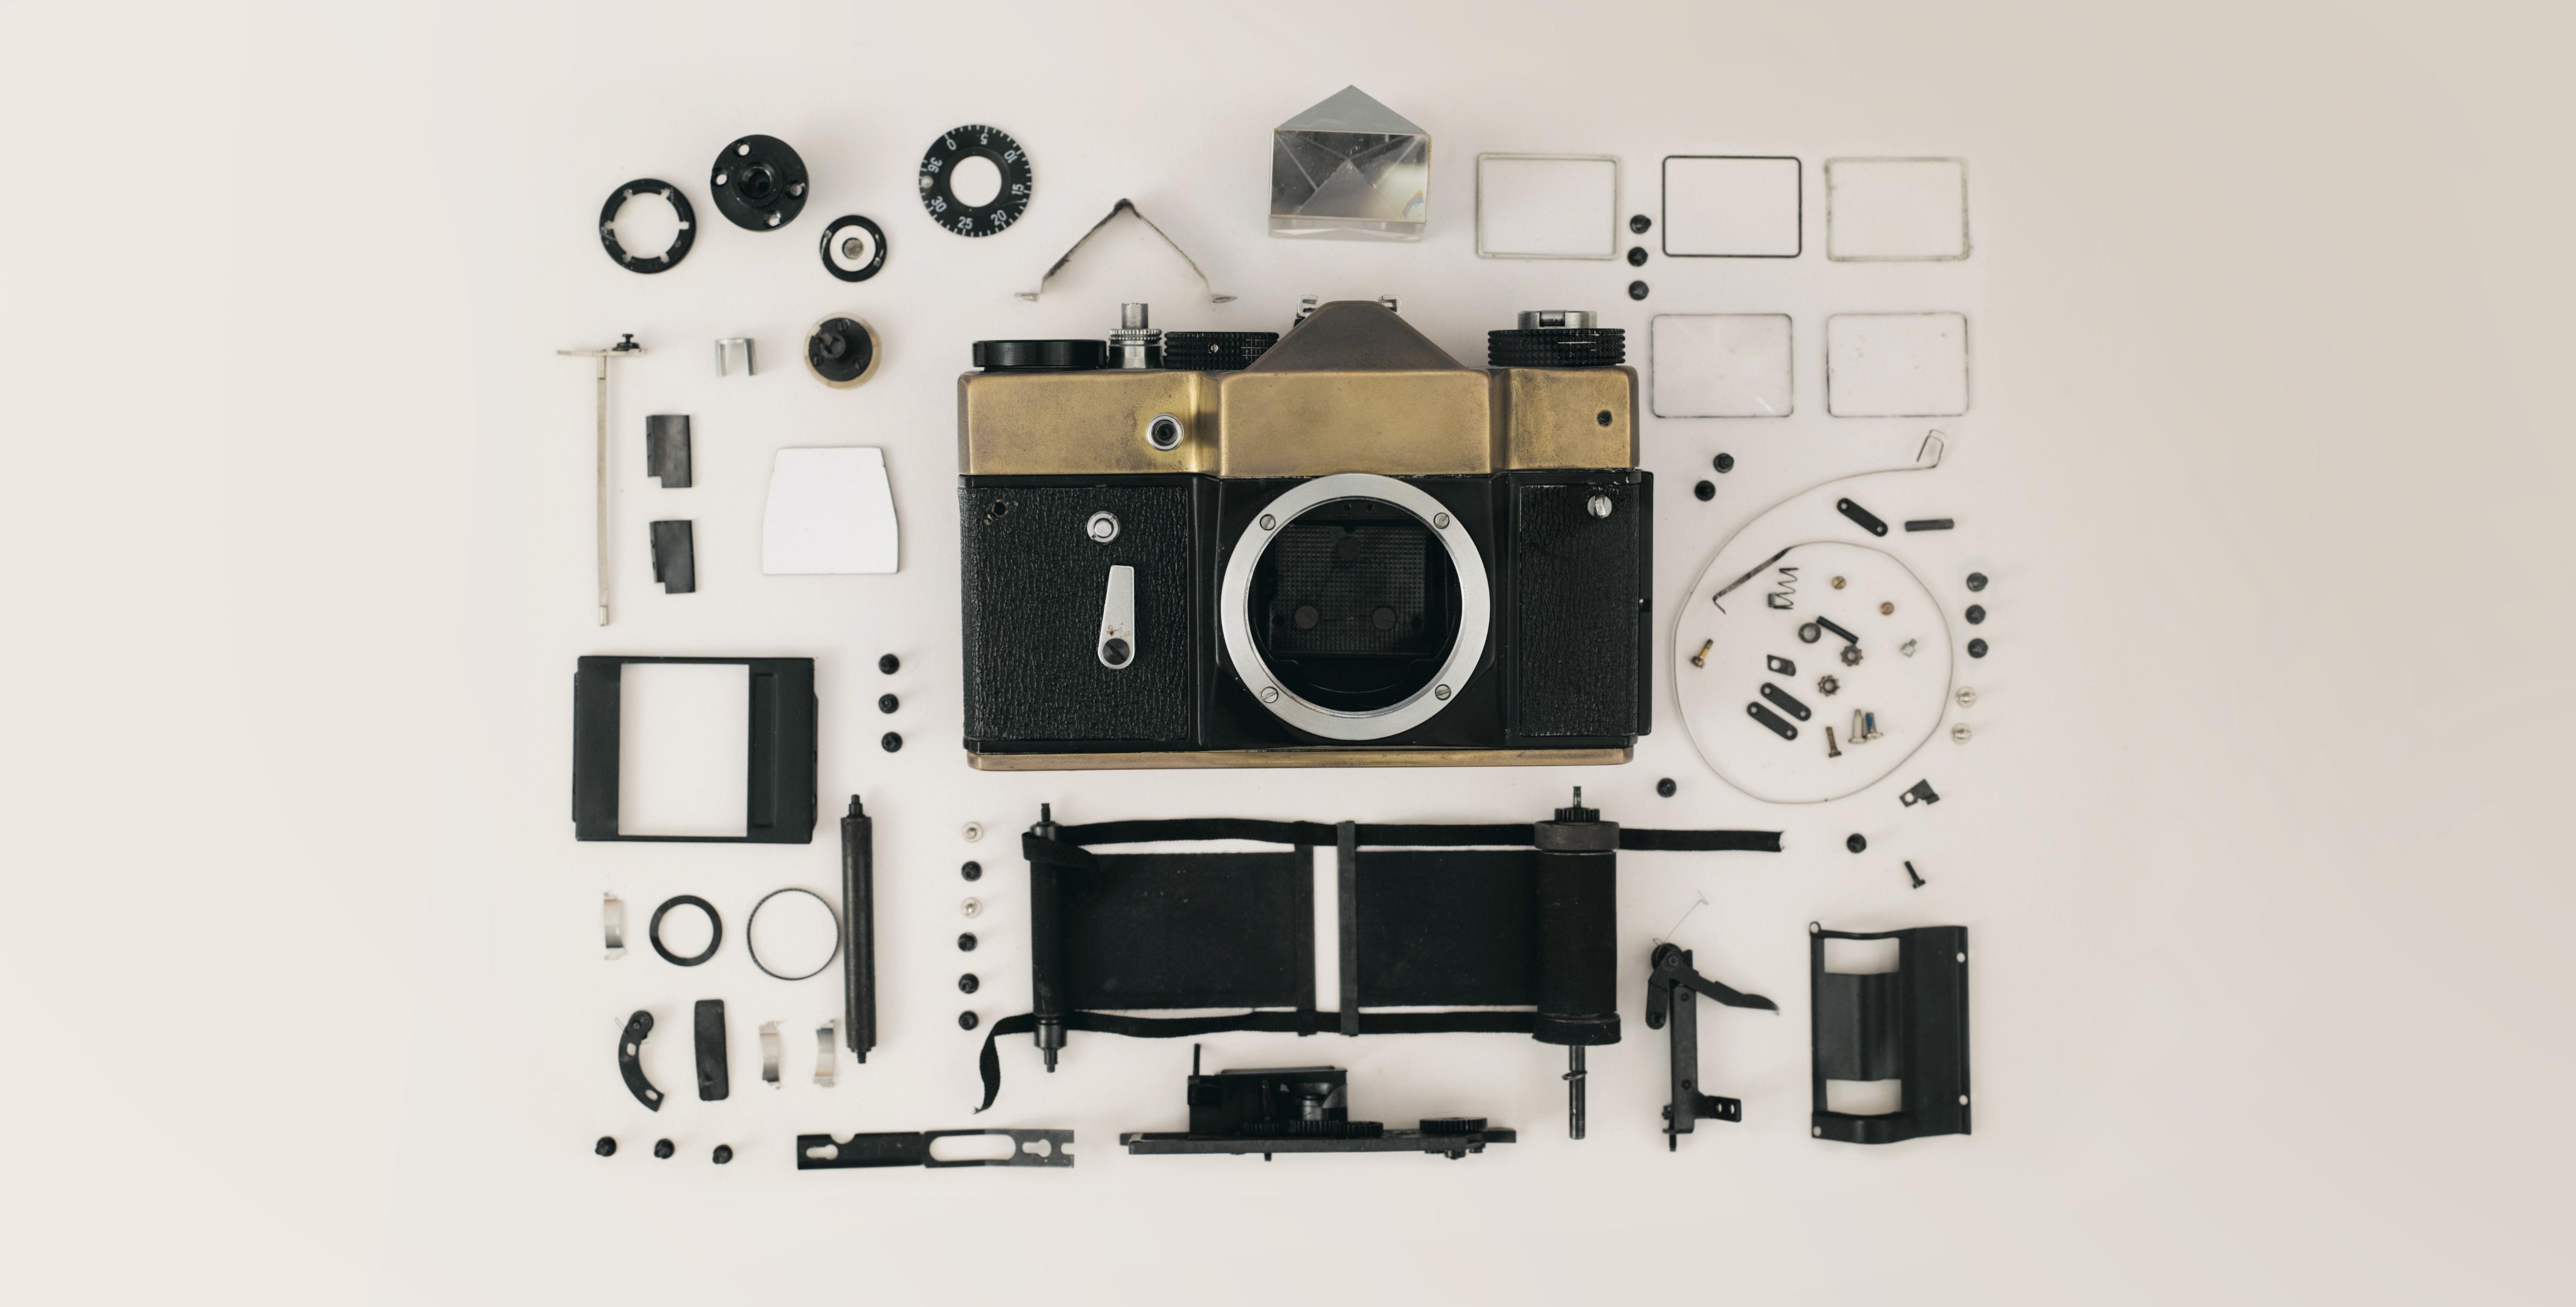 The parts of a DSLR camera laid out in a satisfying arrangement.